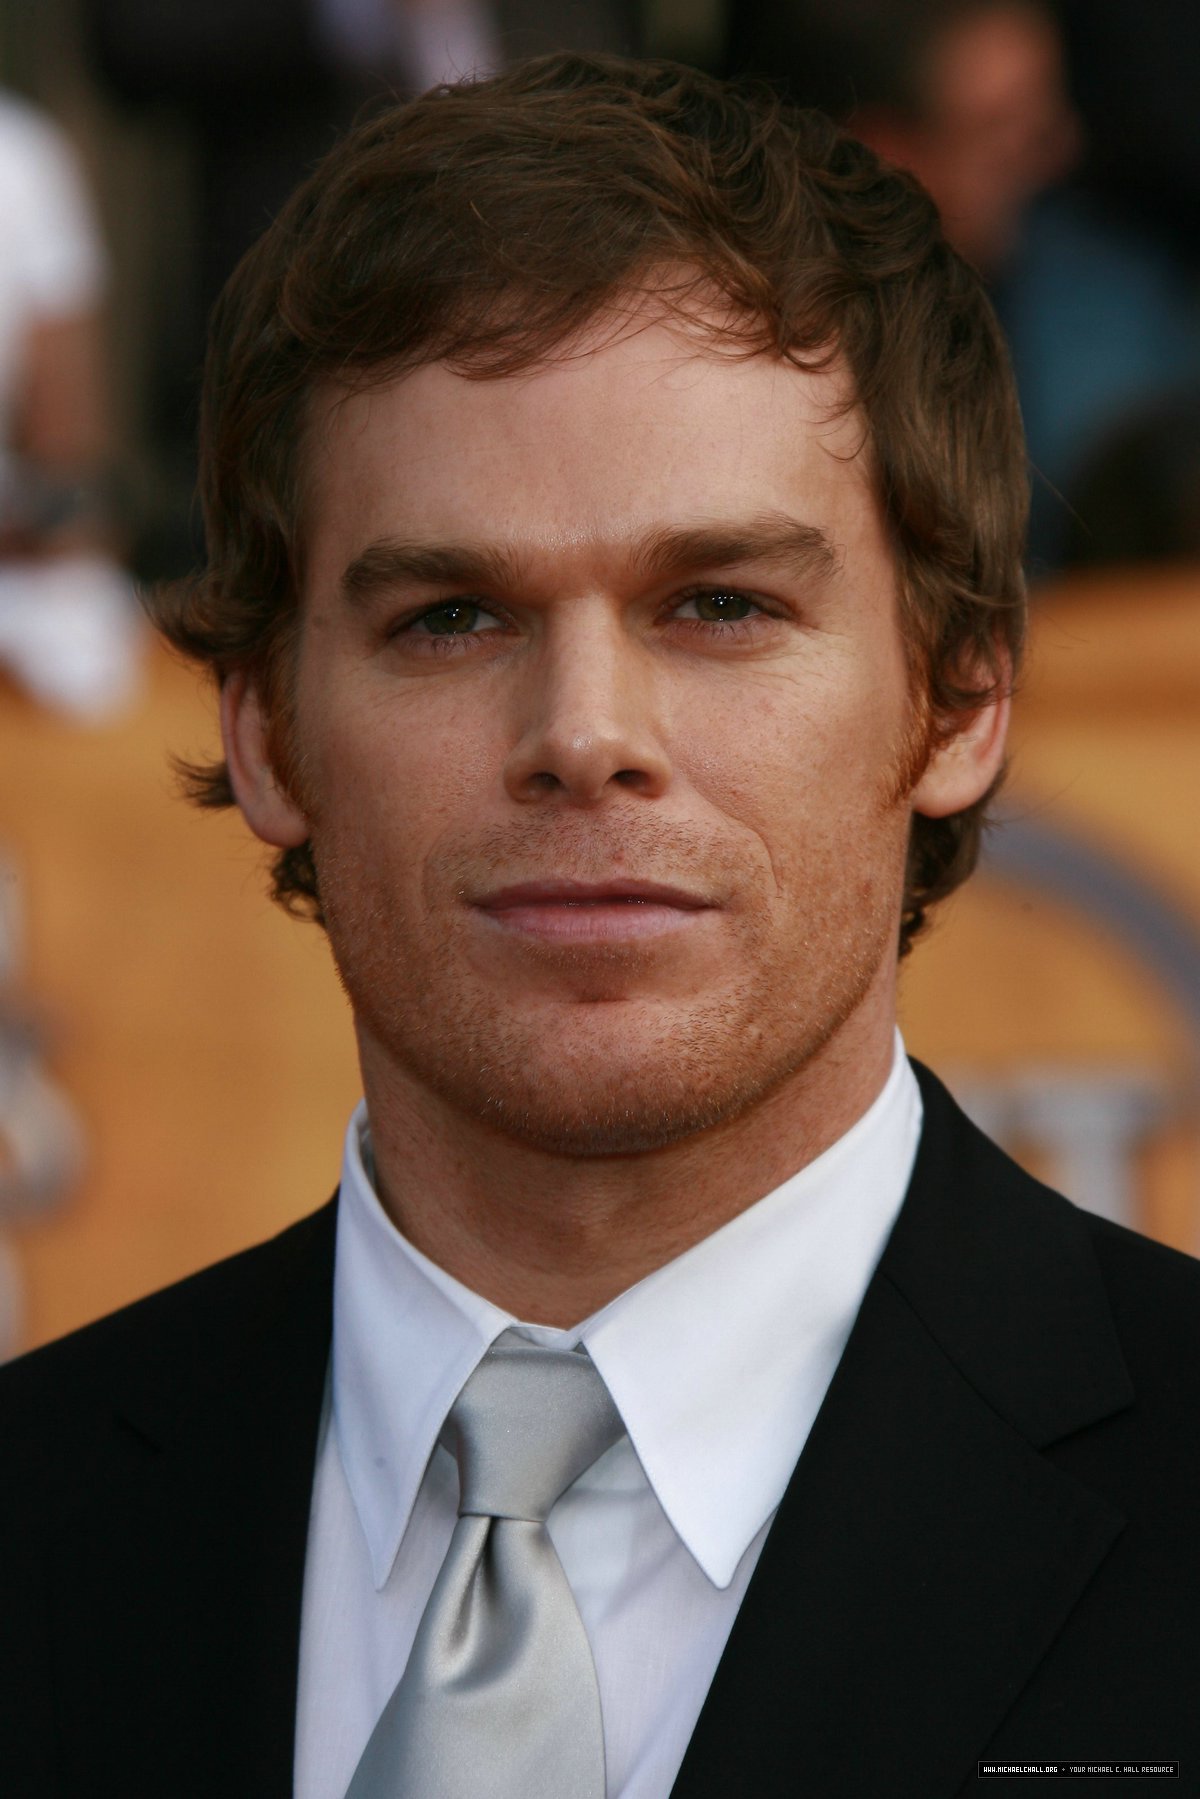 Free Download Michael C Hall Michael C Hall 16499356 1200 1799jpg Images, Photos, Reviews